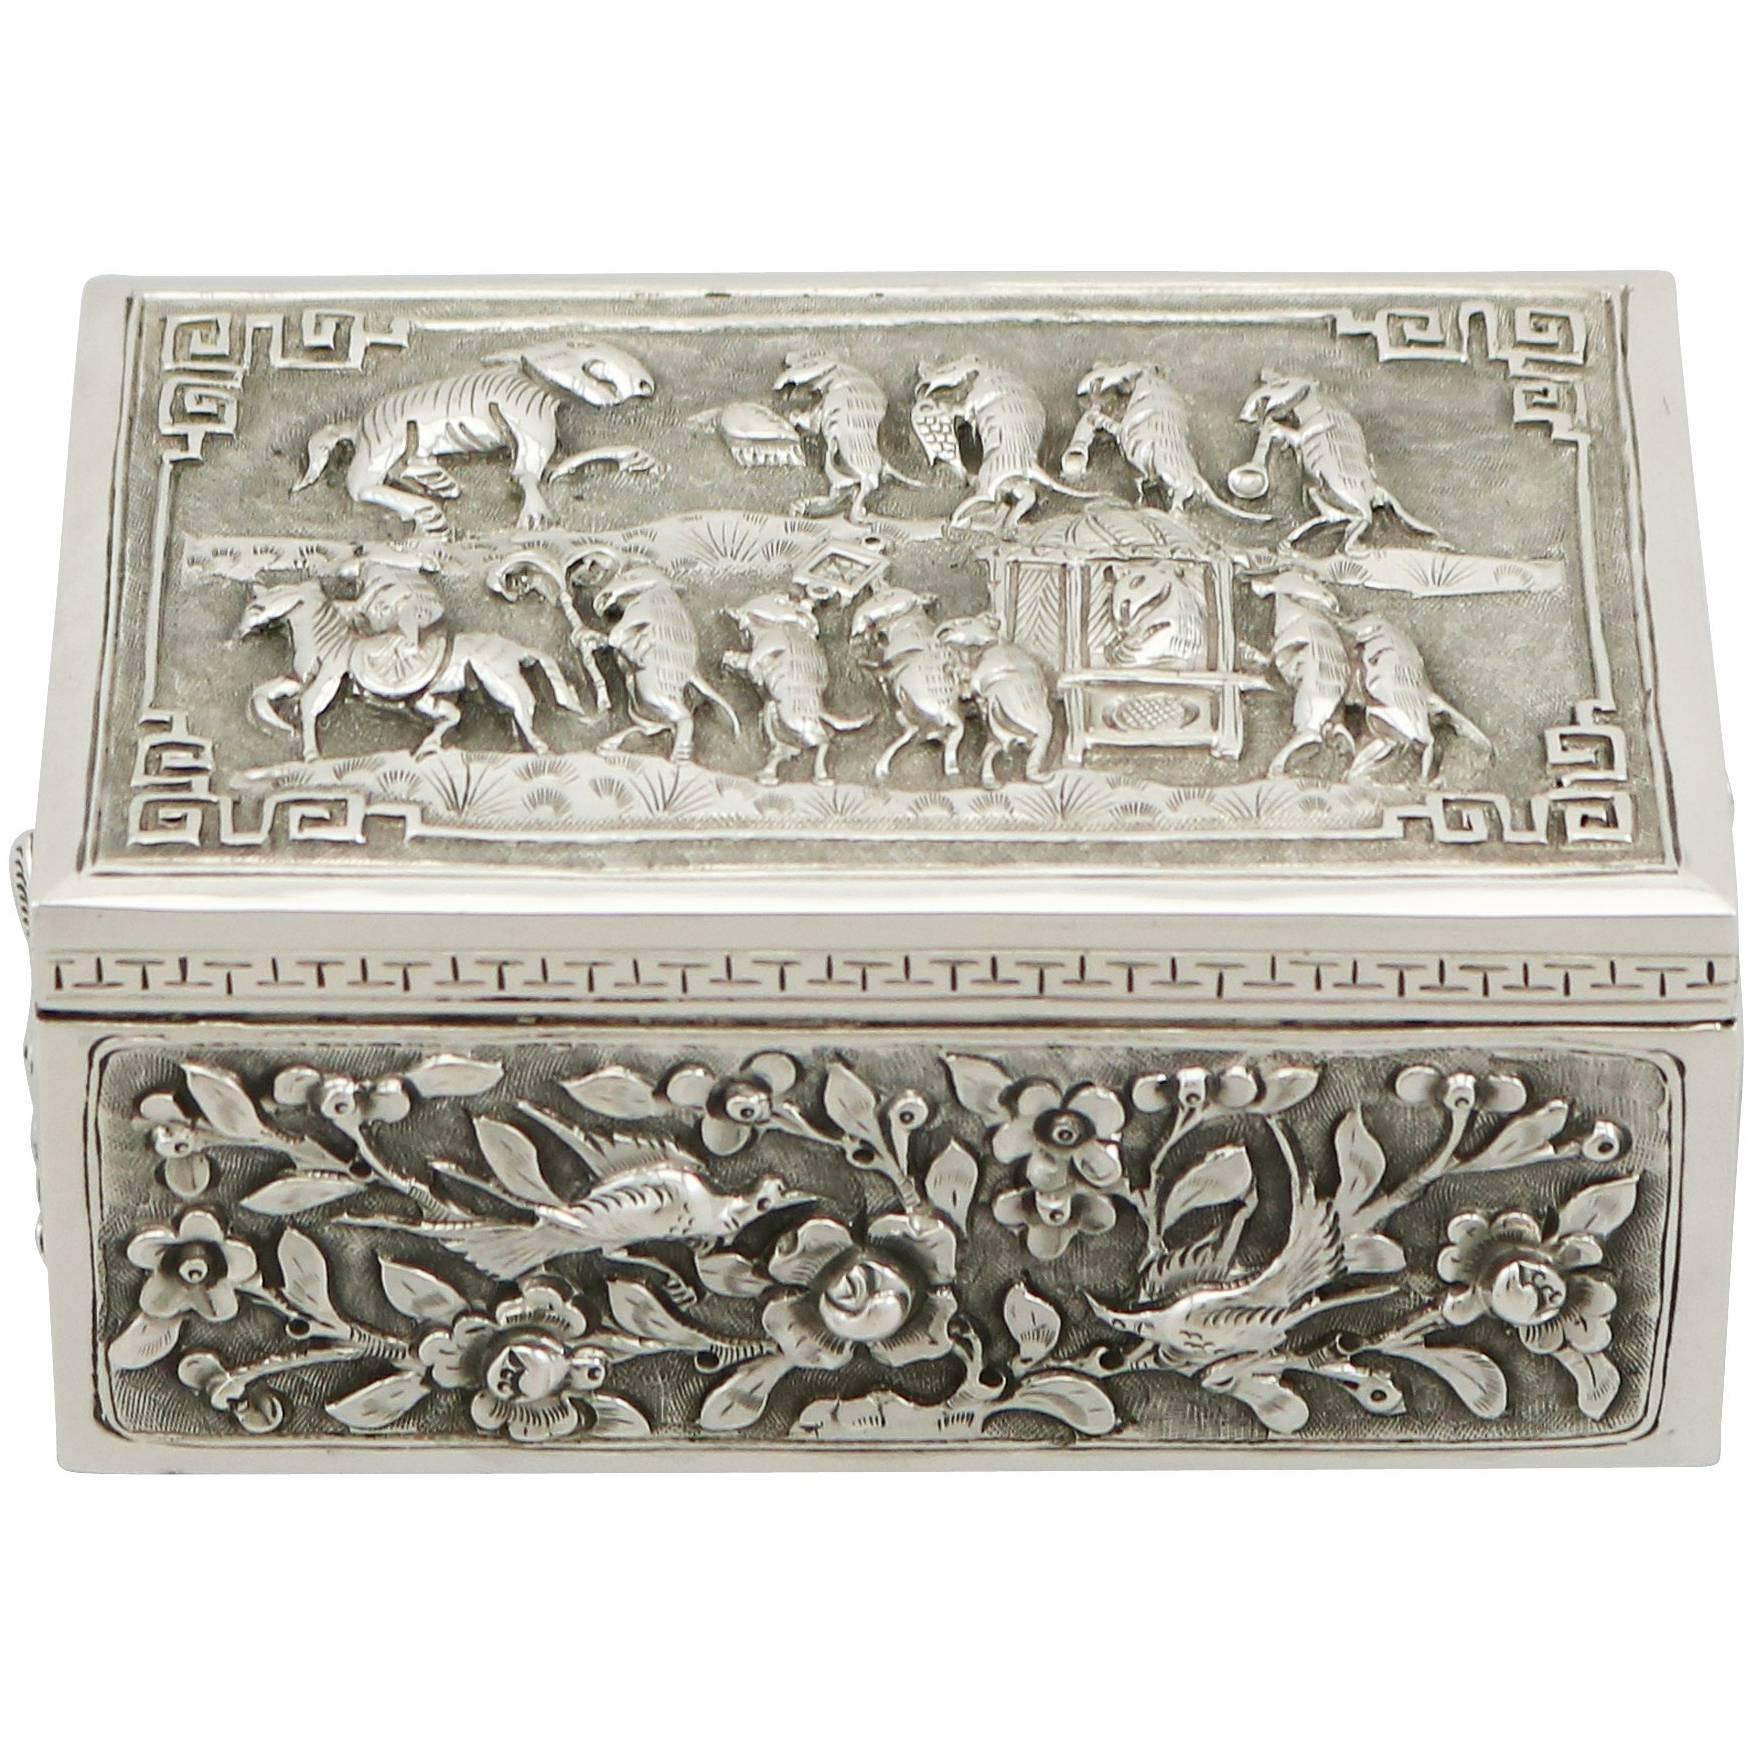 1890s Antique Chinese Export Silver Box